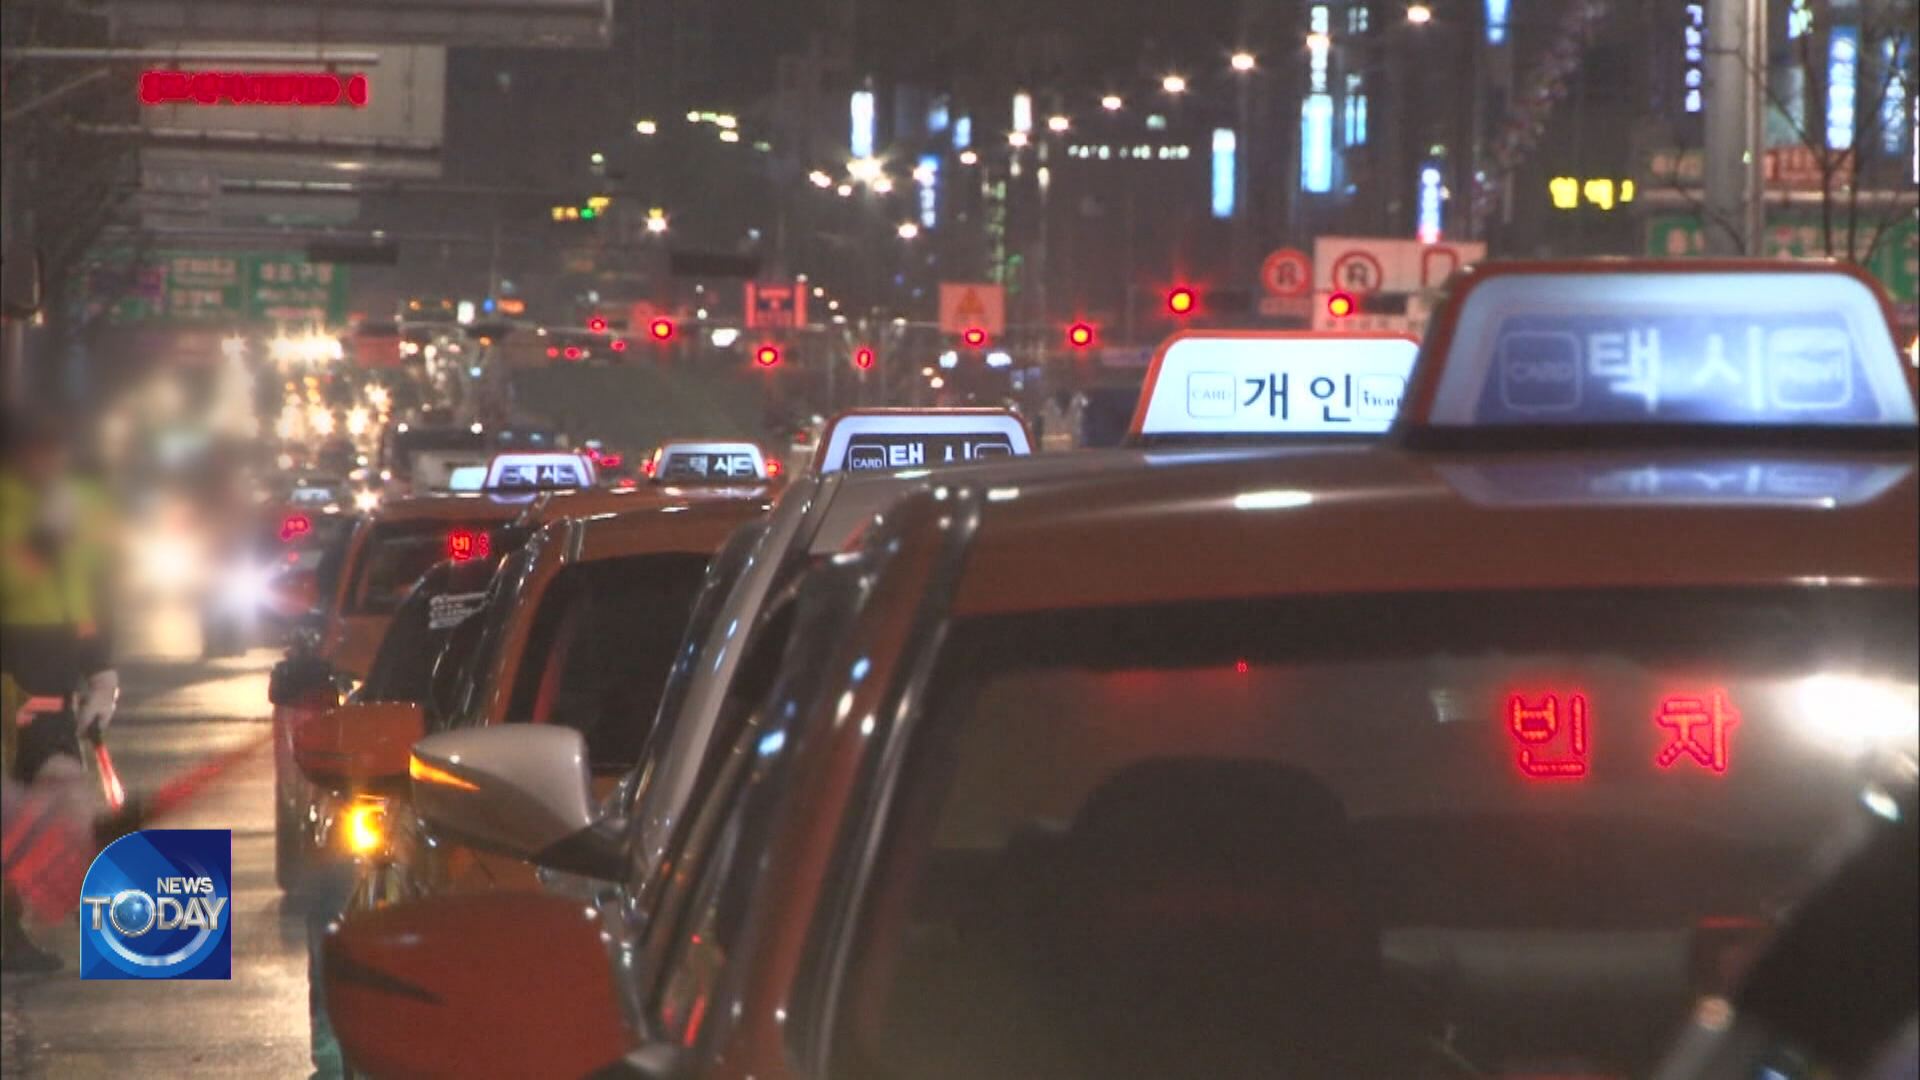 SEOUL TO LIFT RESTRICTIONS ON TAXIS